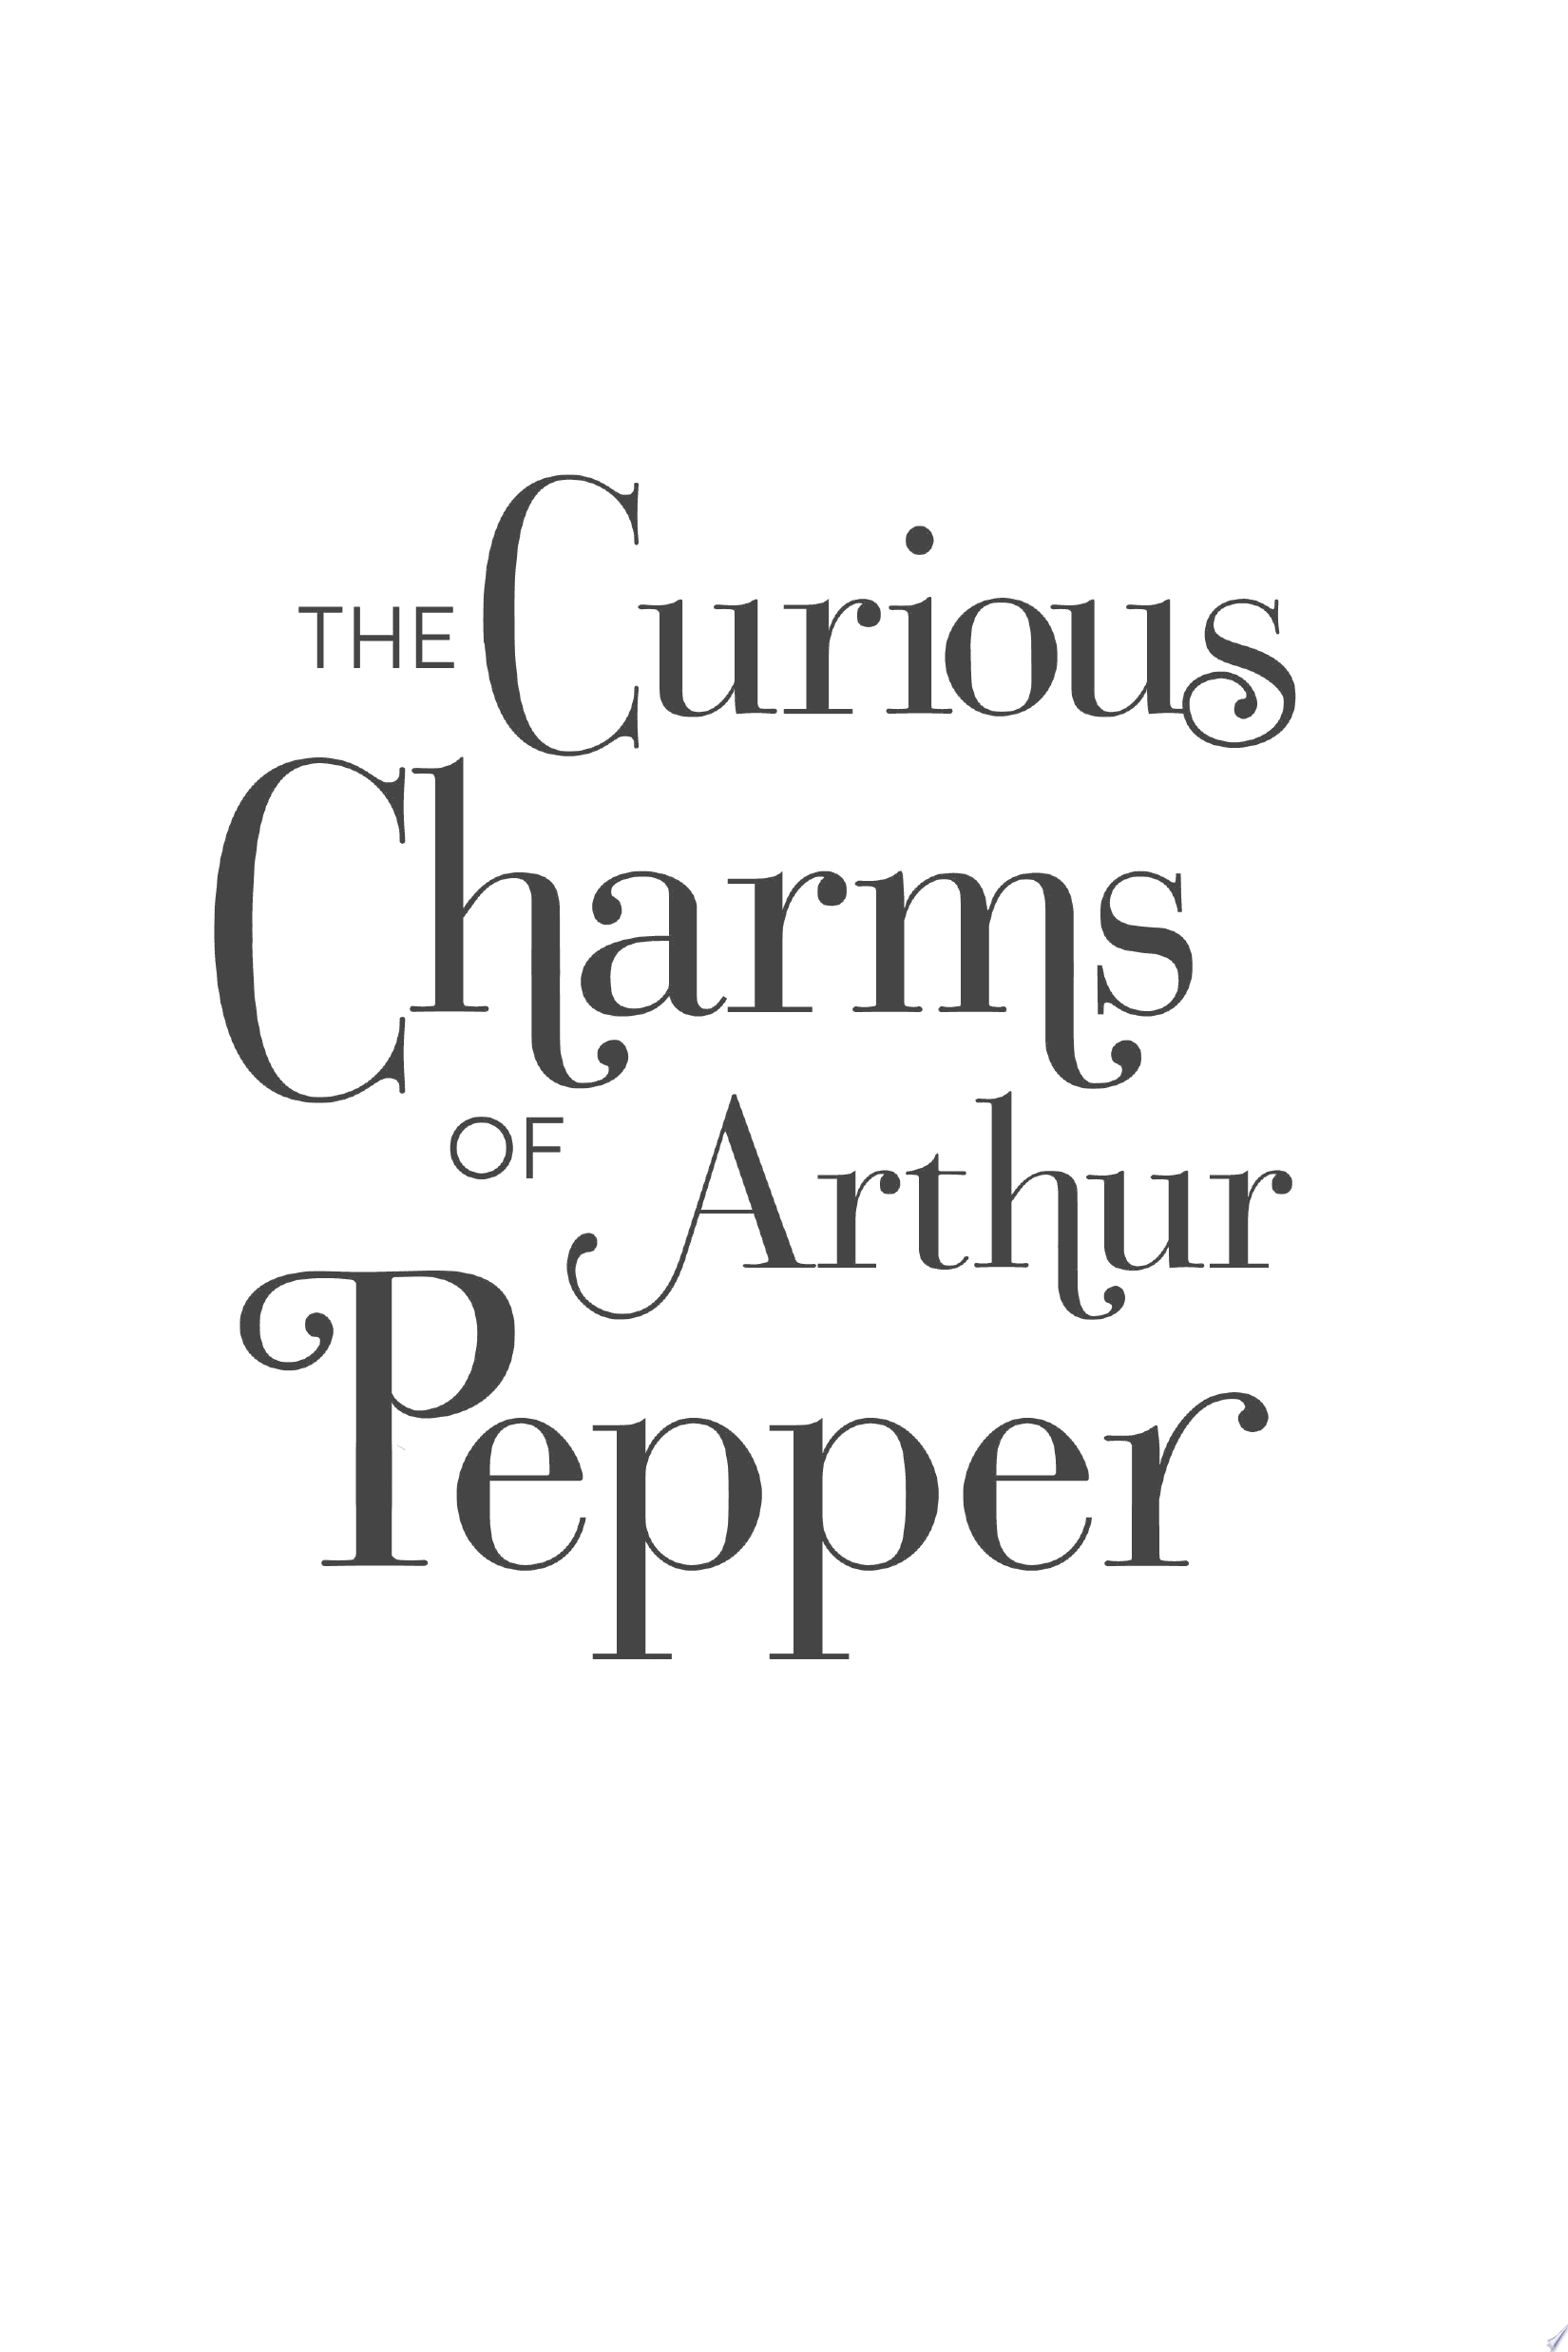 Image for "The Curious Charms of Arthur Pepper"